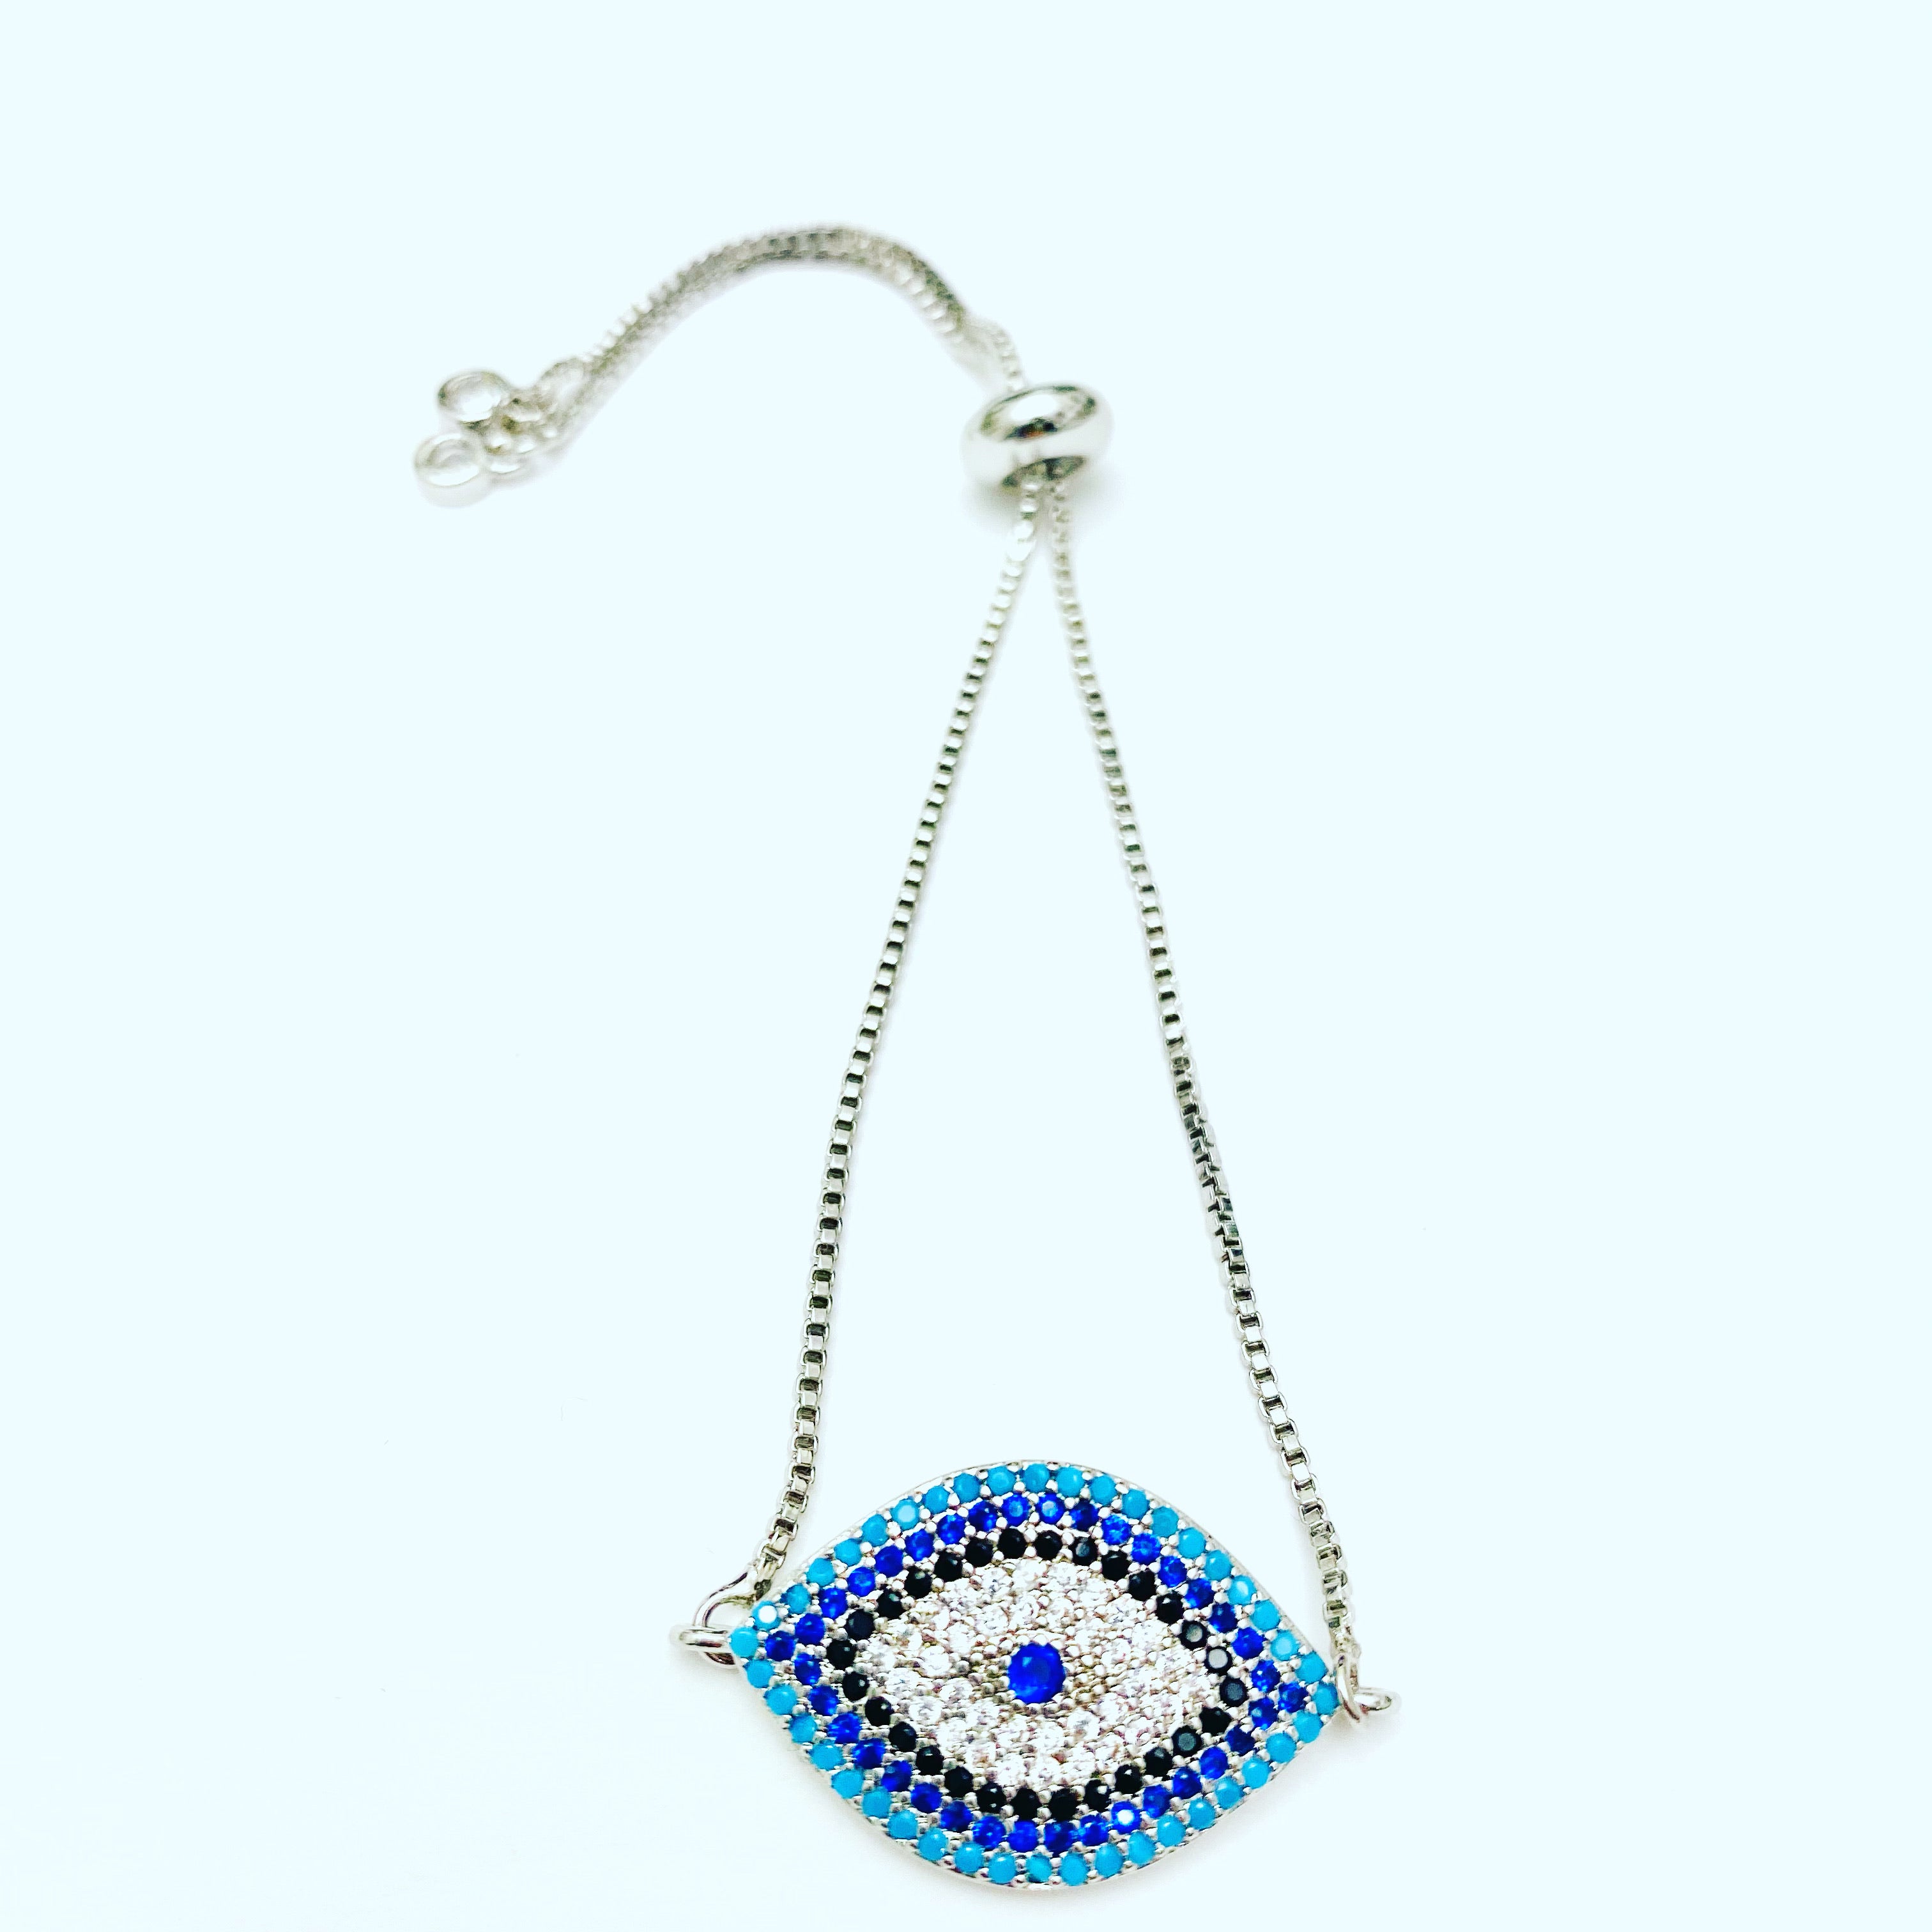 7 Incredible Benefits of Wearing an Evil Eye Accessory